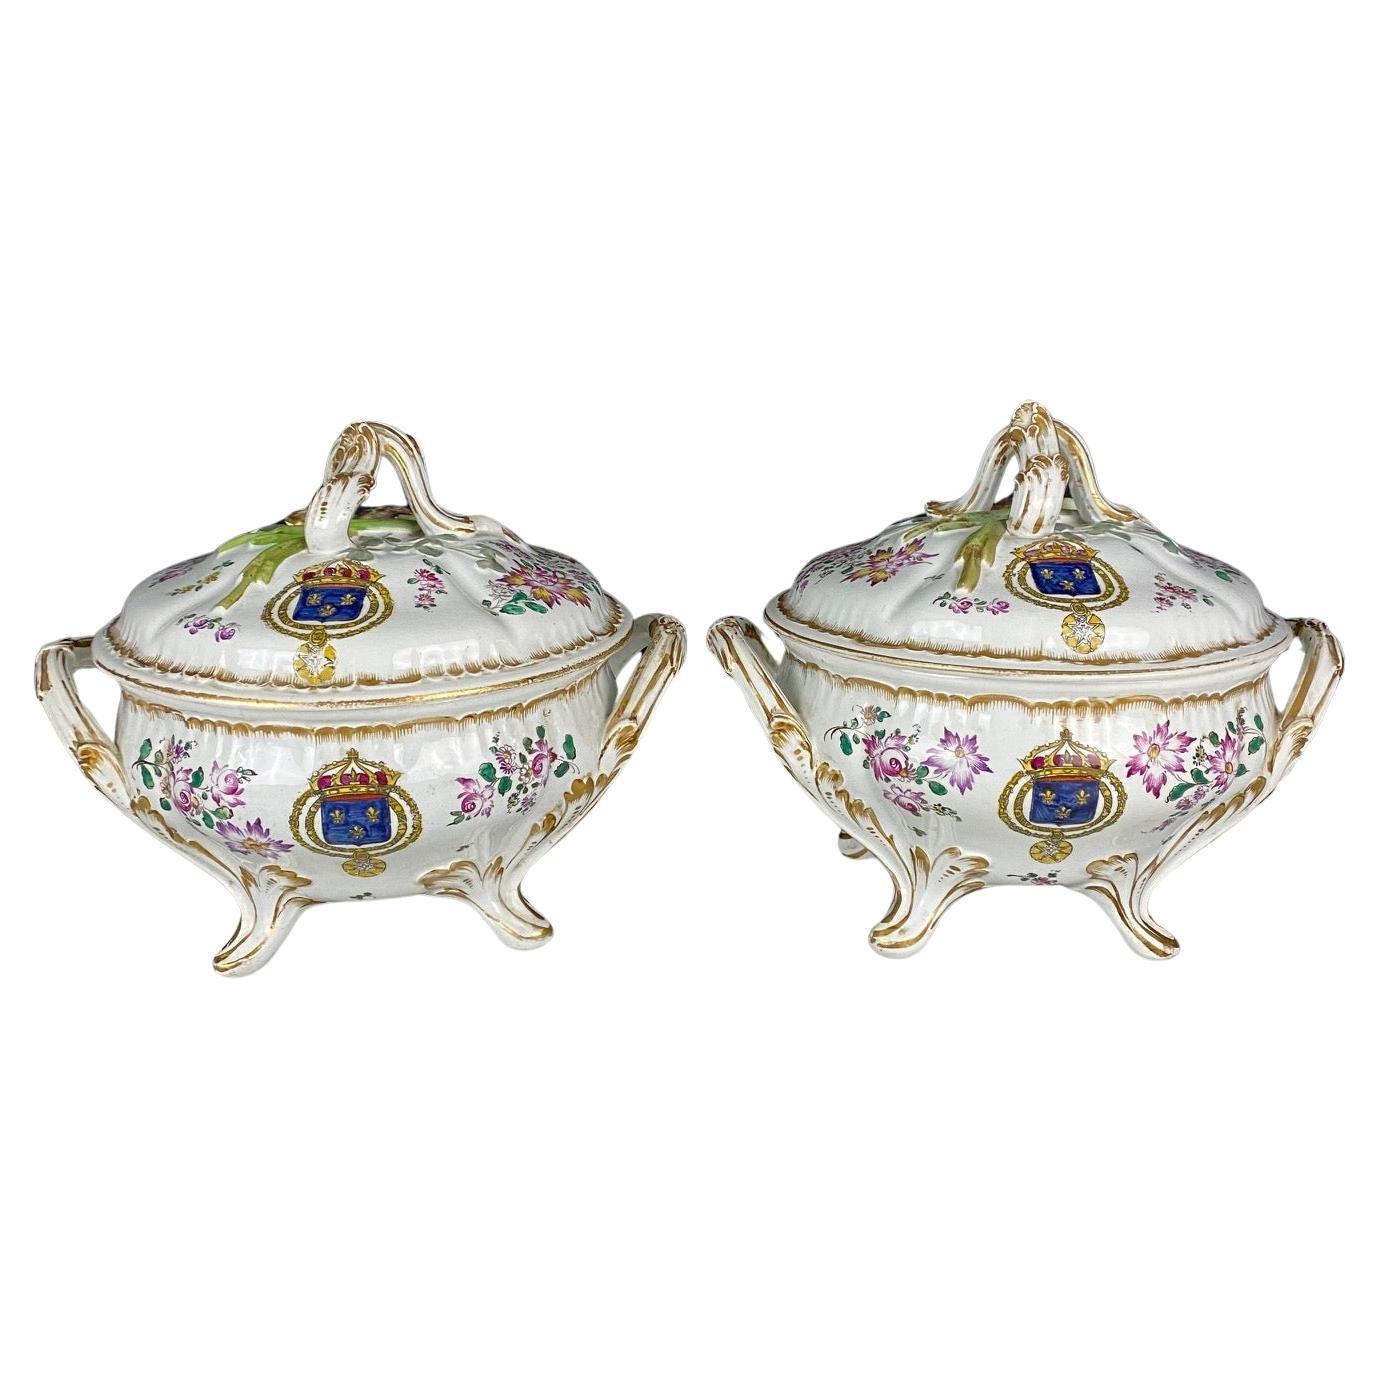 Pair French Hand Painted Faience Porcelain Soup Tureens with Coats of Arms